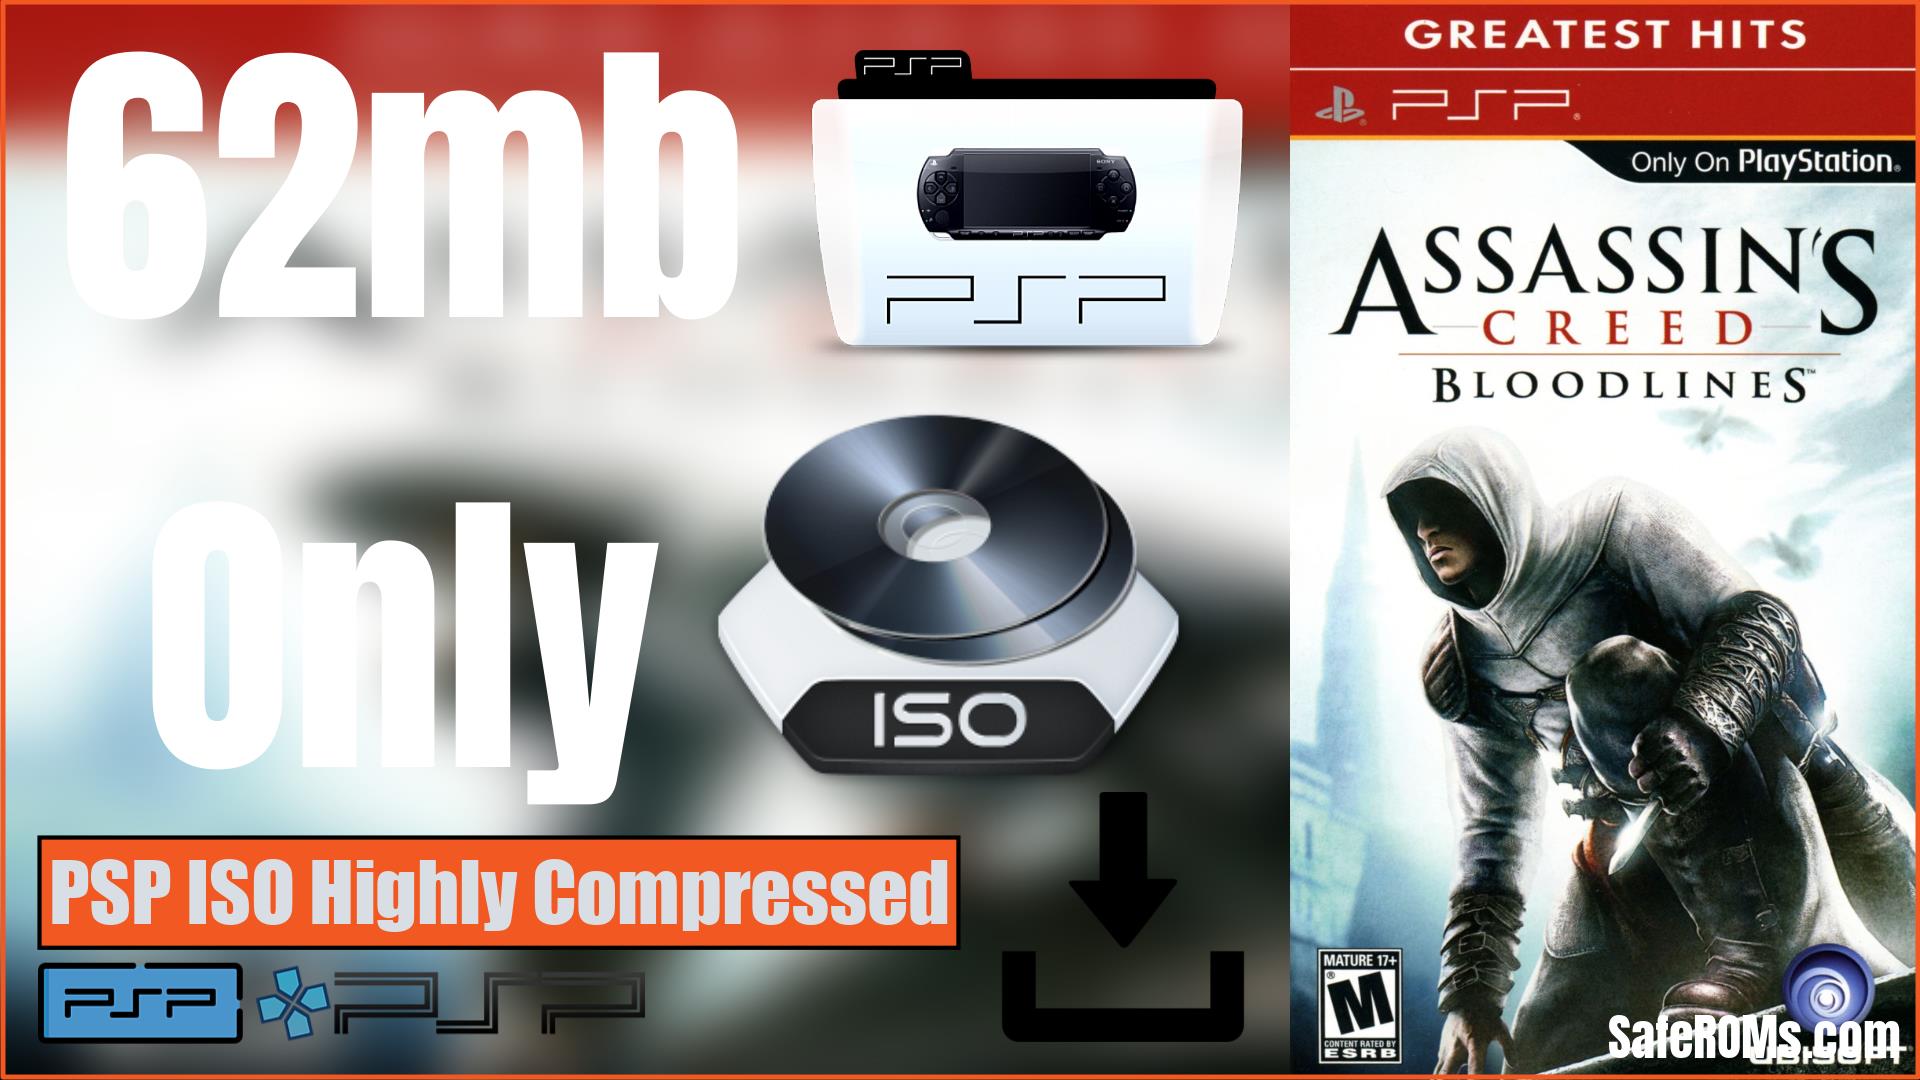 Assassin's Creed PSP ISO Highly Compressed